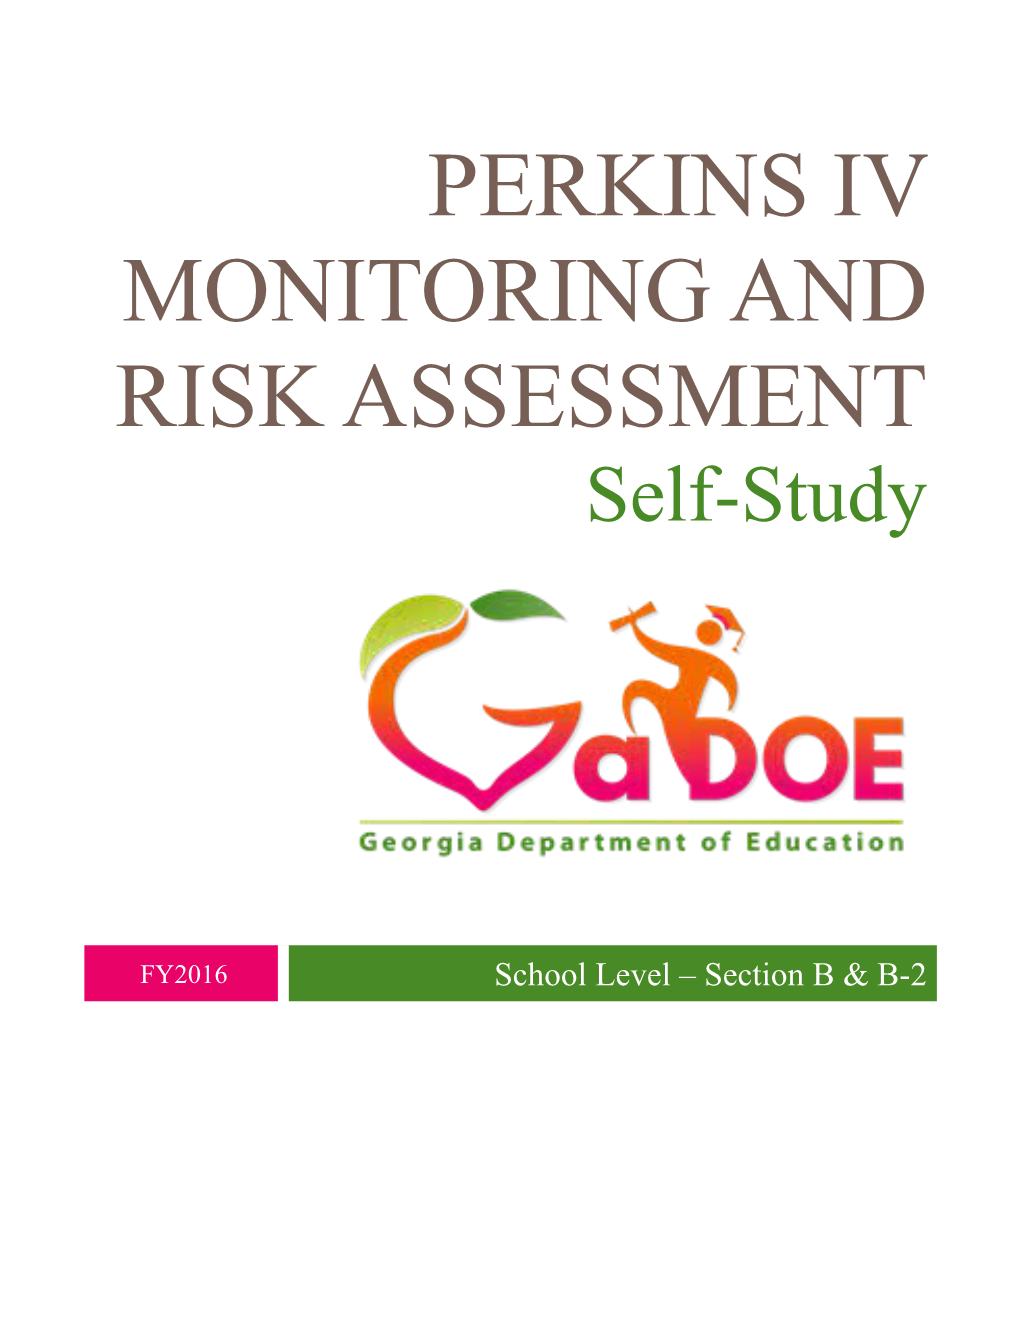 Perkins IV Monitoring and Risk Assessment